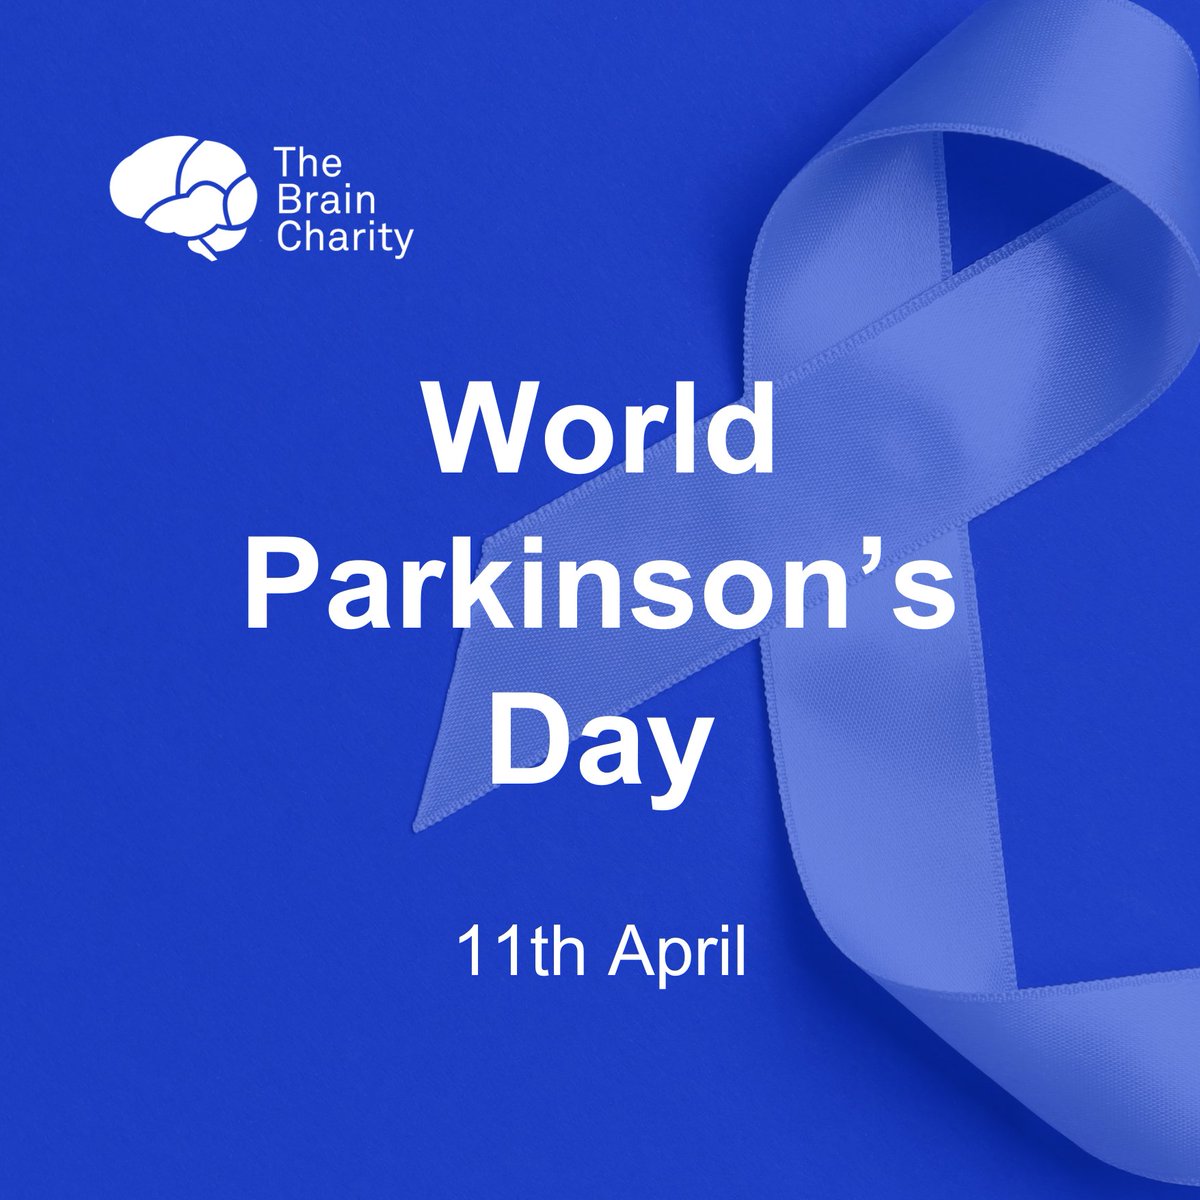 It's #WorldParkinsonsDay Parkinson’s is a progressive neurological condition which affects the brain and gets worse over time. Find out how we can help provide support: thebraincharity.org.uk/condition/park…